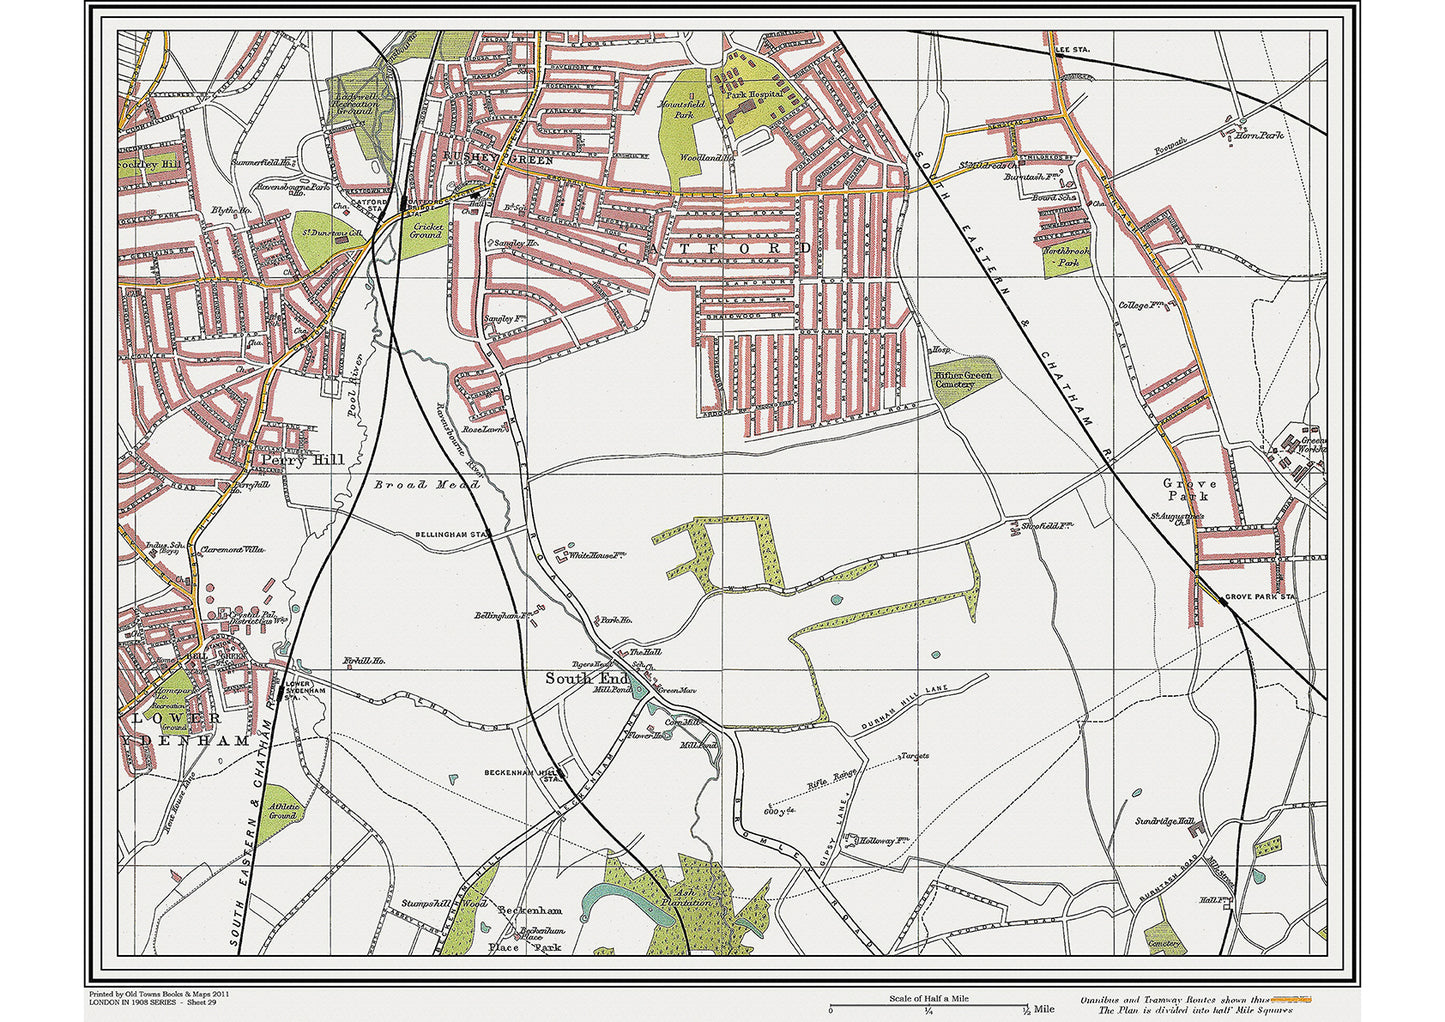 London in 1908 Series - showing Rushey Green, Grove Park area (Lon1908-29)